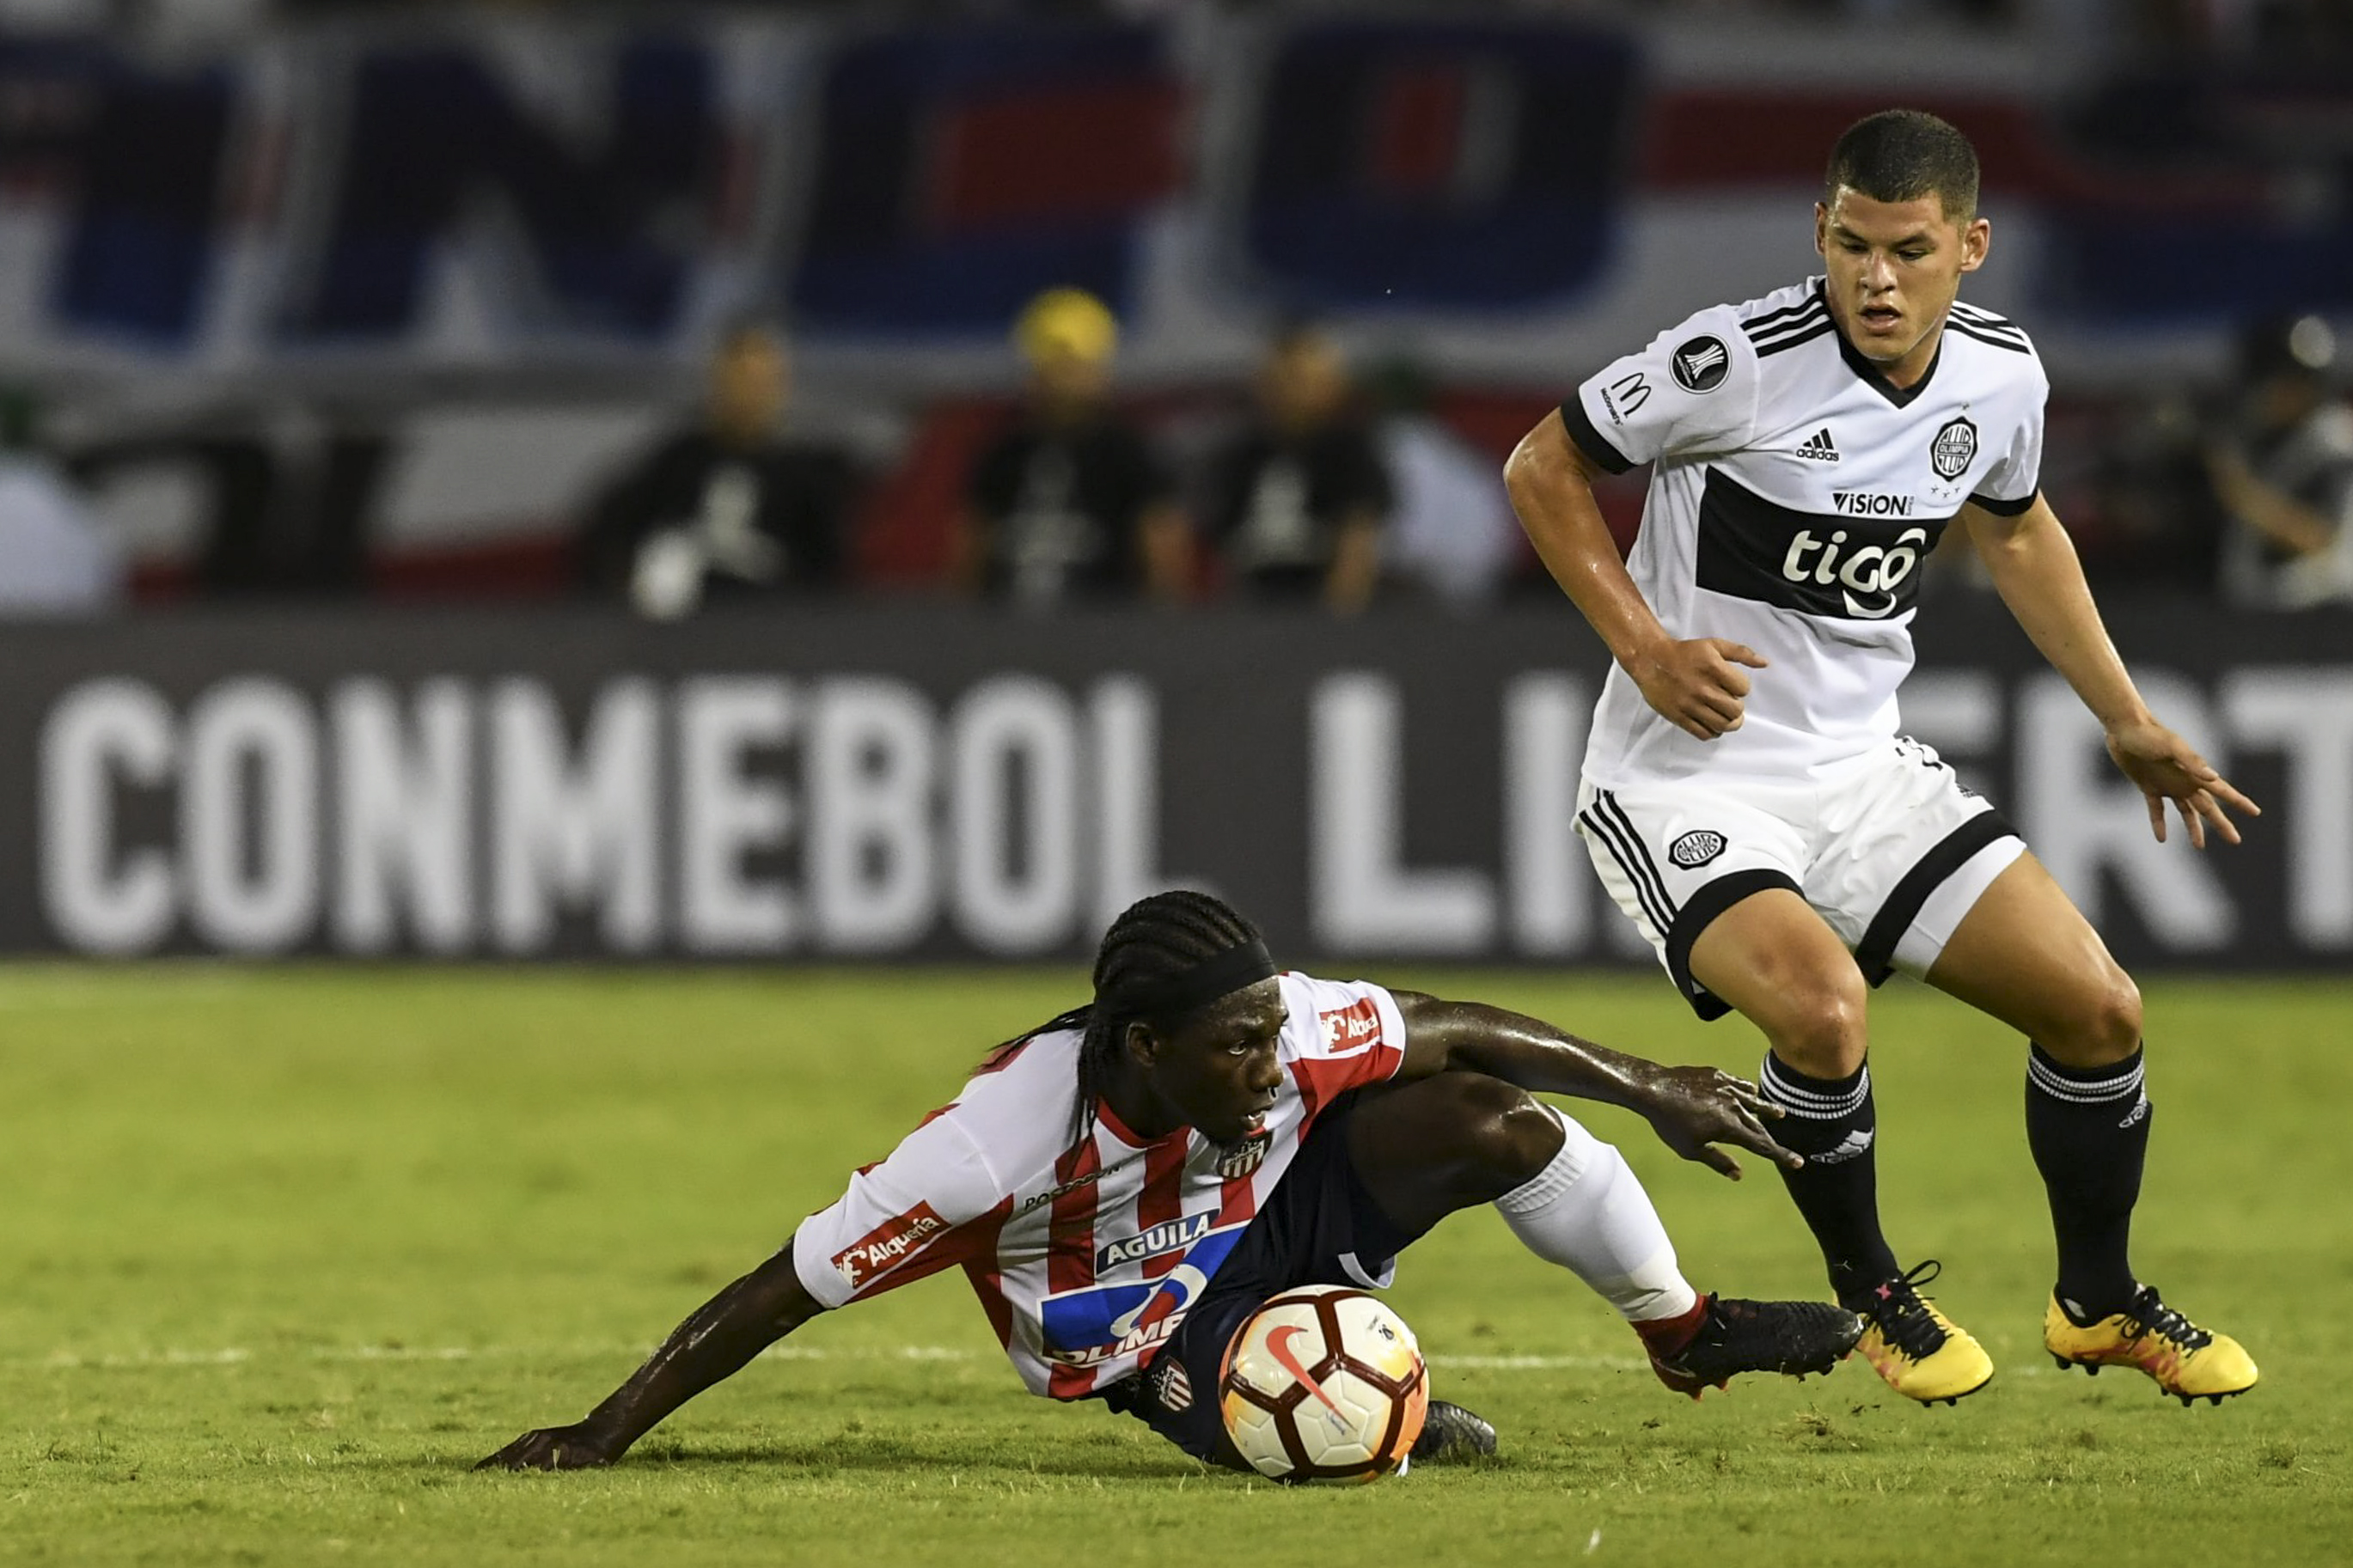 Colombian Junior forward Yimmi Chara (L) vies for the ball with Paraguayan Olimpia midfielder Richard Sanchez during their Copa Libertadores football match at Roberto Melendez stadium in Barranquilla, Colombia, on February 8, 2018.  / AFP PHOTO / Luis ACOSTA        (Photo credit should read LUIS ACOSTA/AFP/Getty Images)